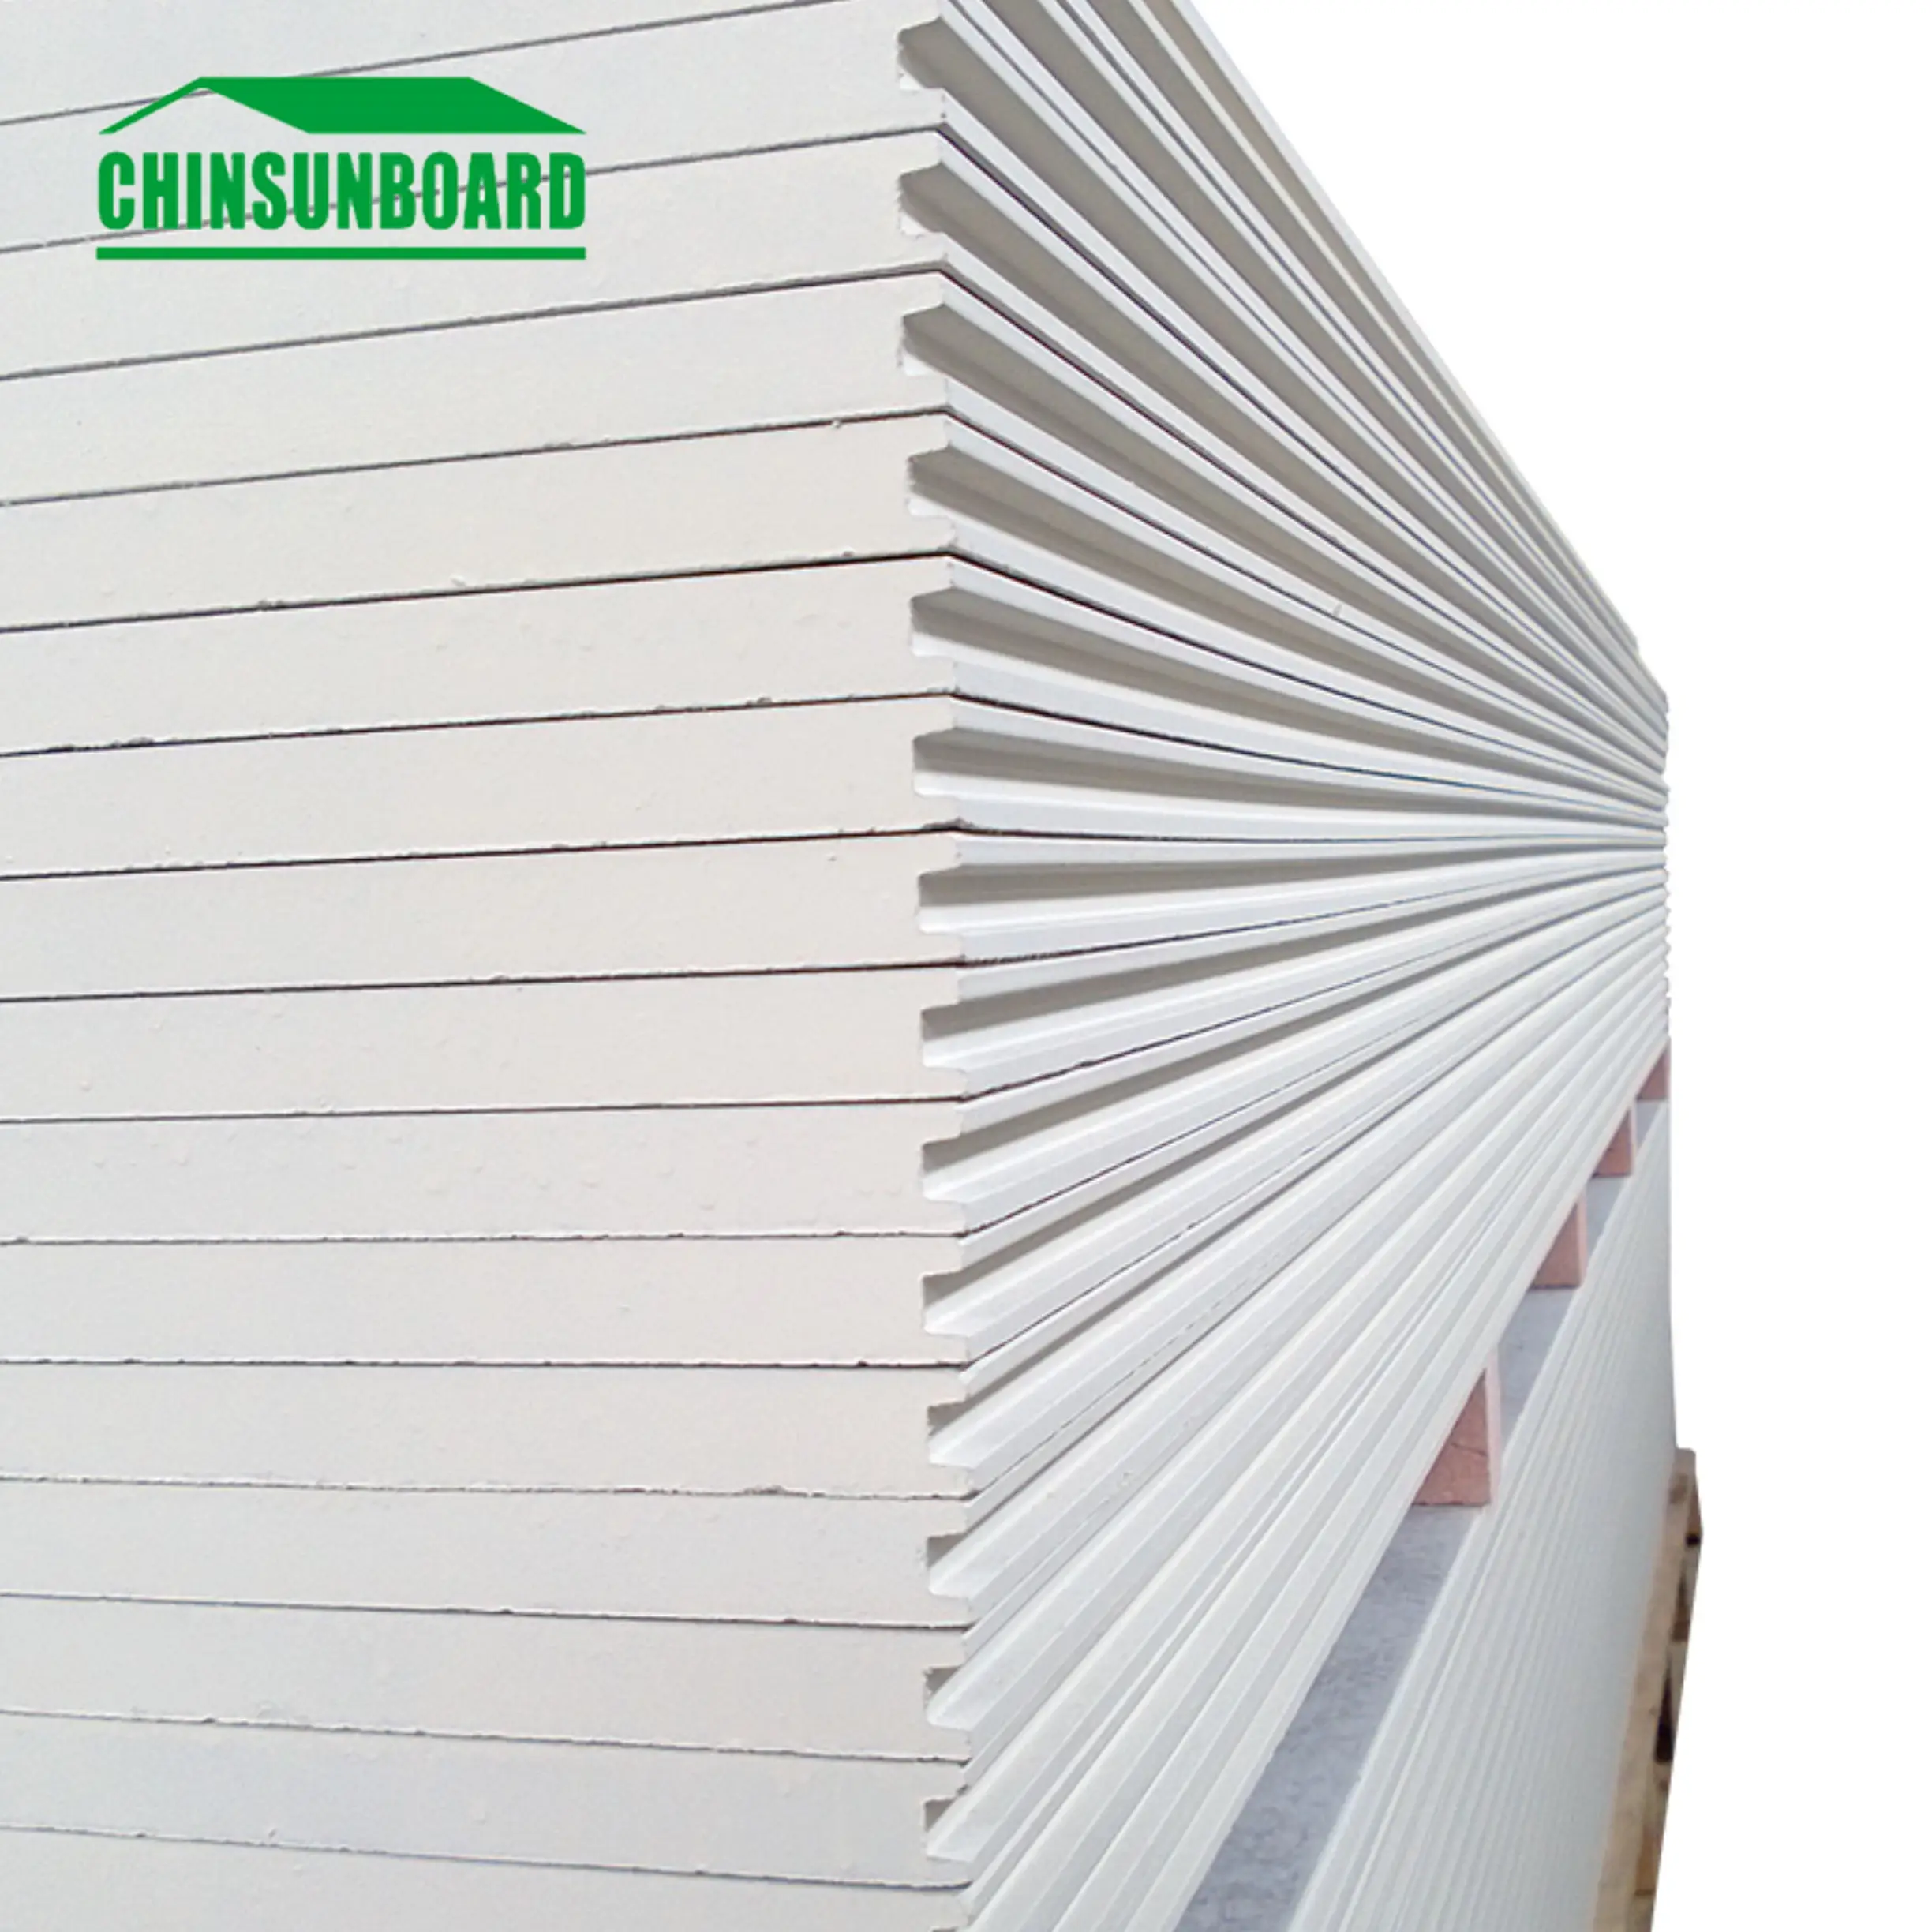 18mm/20mm Tongue and Groove Fiber Cement Board For Flooring